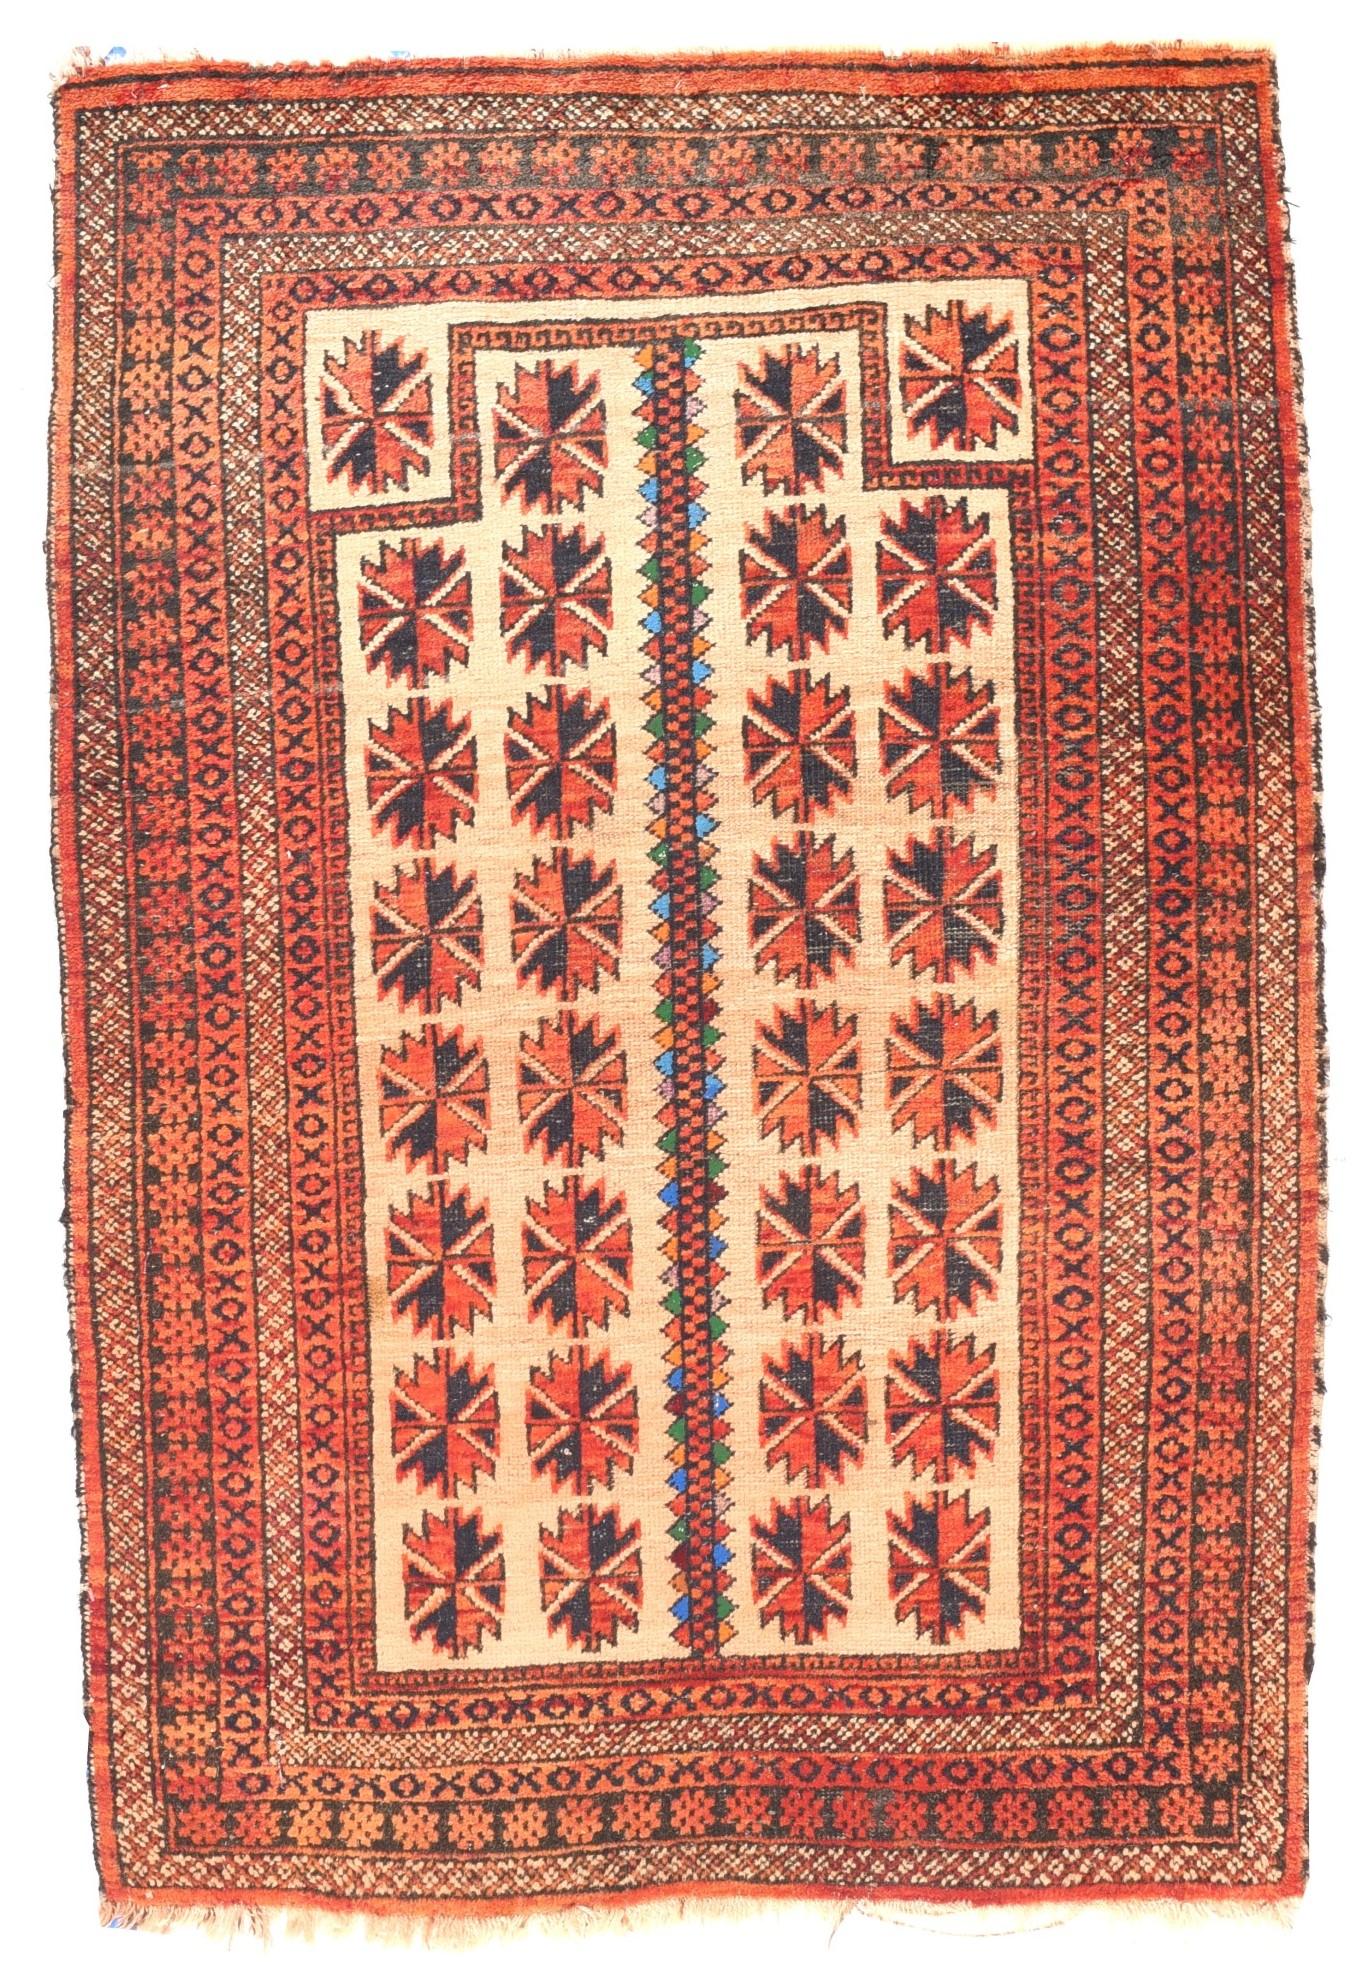 Vintage Balouch Rug 3'2'' x 4'2'' In Good Condition For Sale In New York, NY